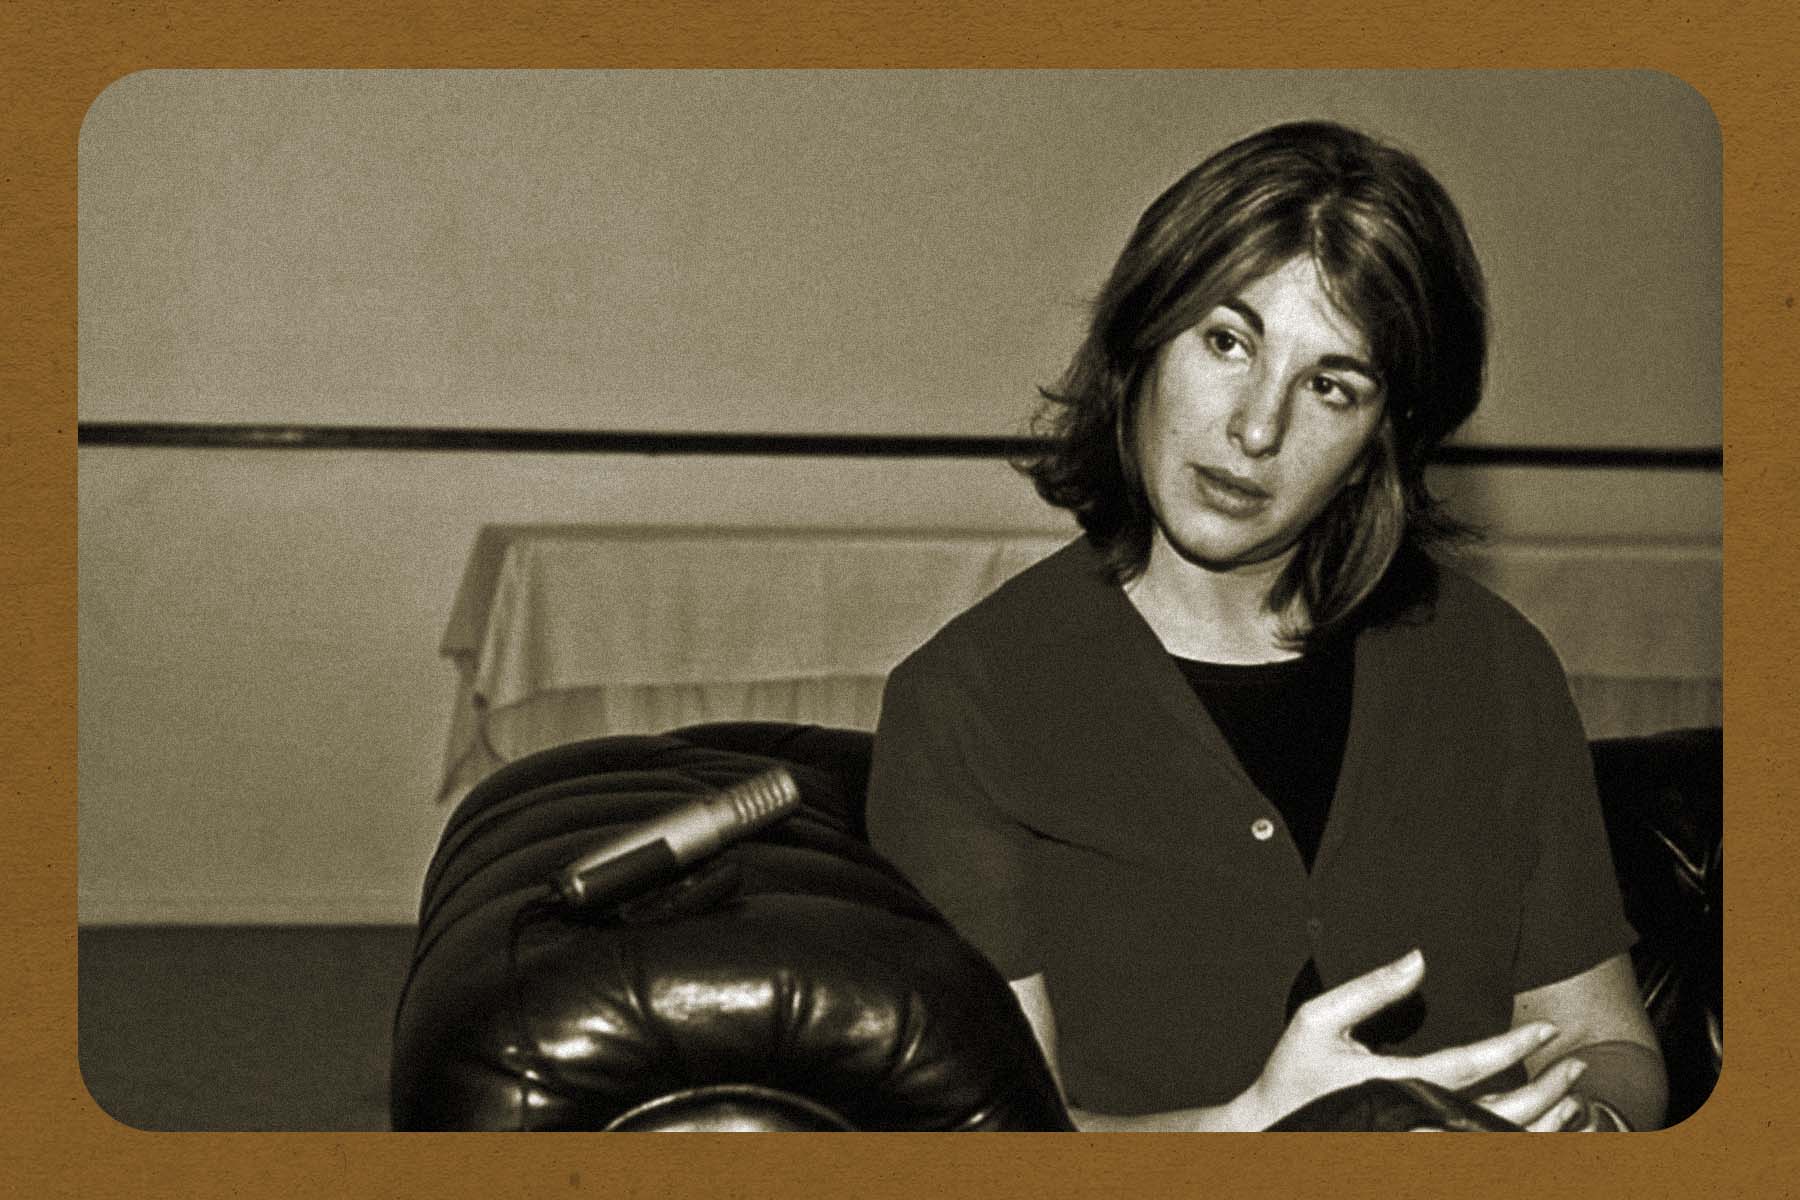 A photo illustration featuring a photo of Naomi Klein speaking at the 2002 World Social Forum.